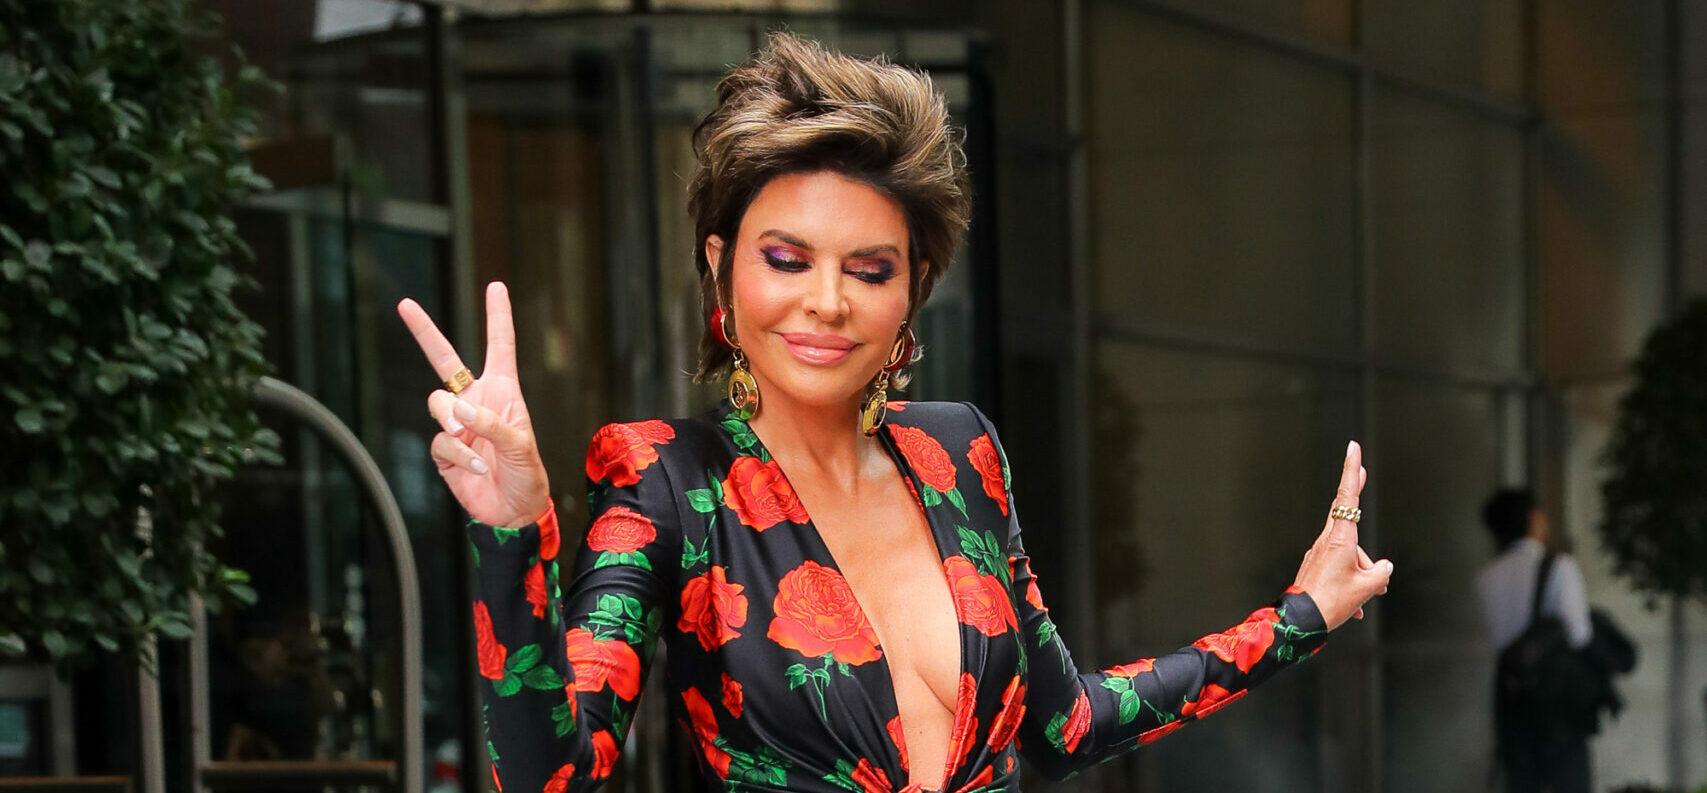 Lisa Rinna wore a rose-print YSL catsuit as leaving her hotel in New York City